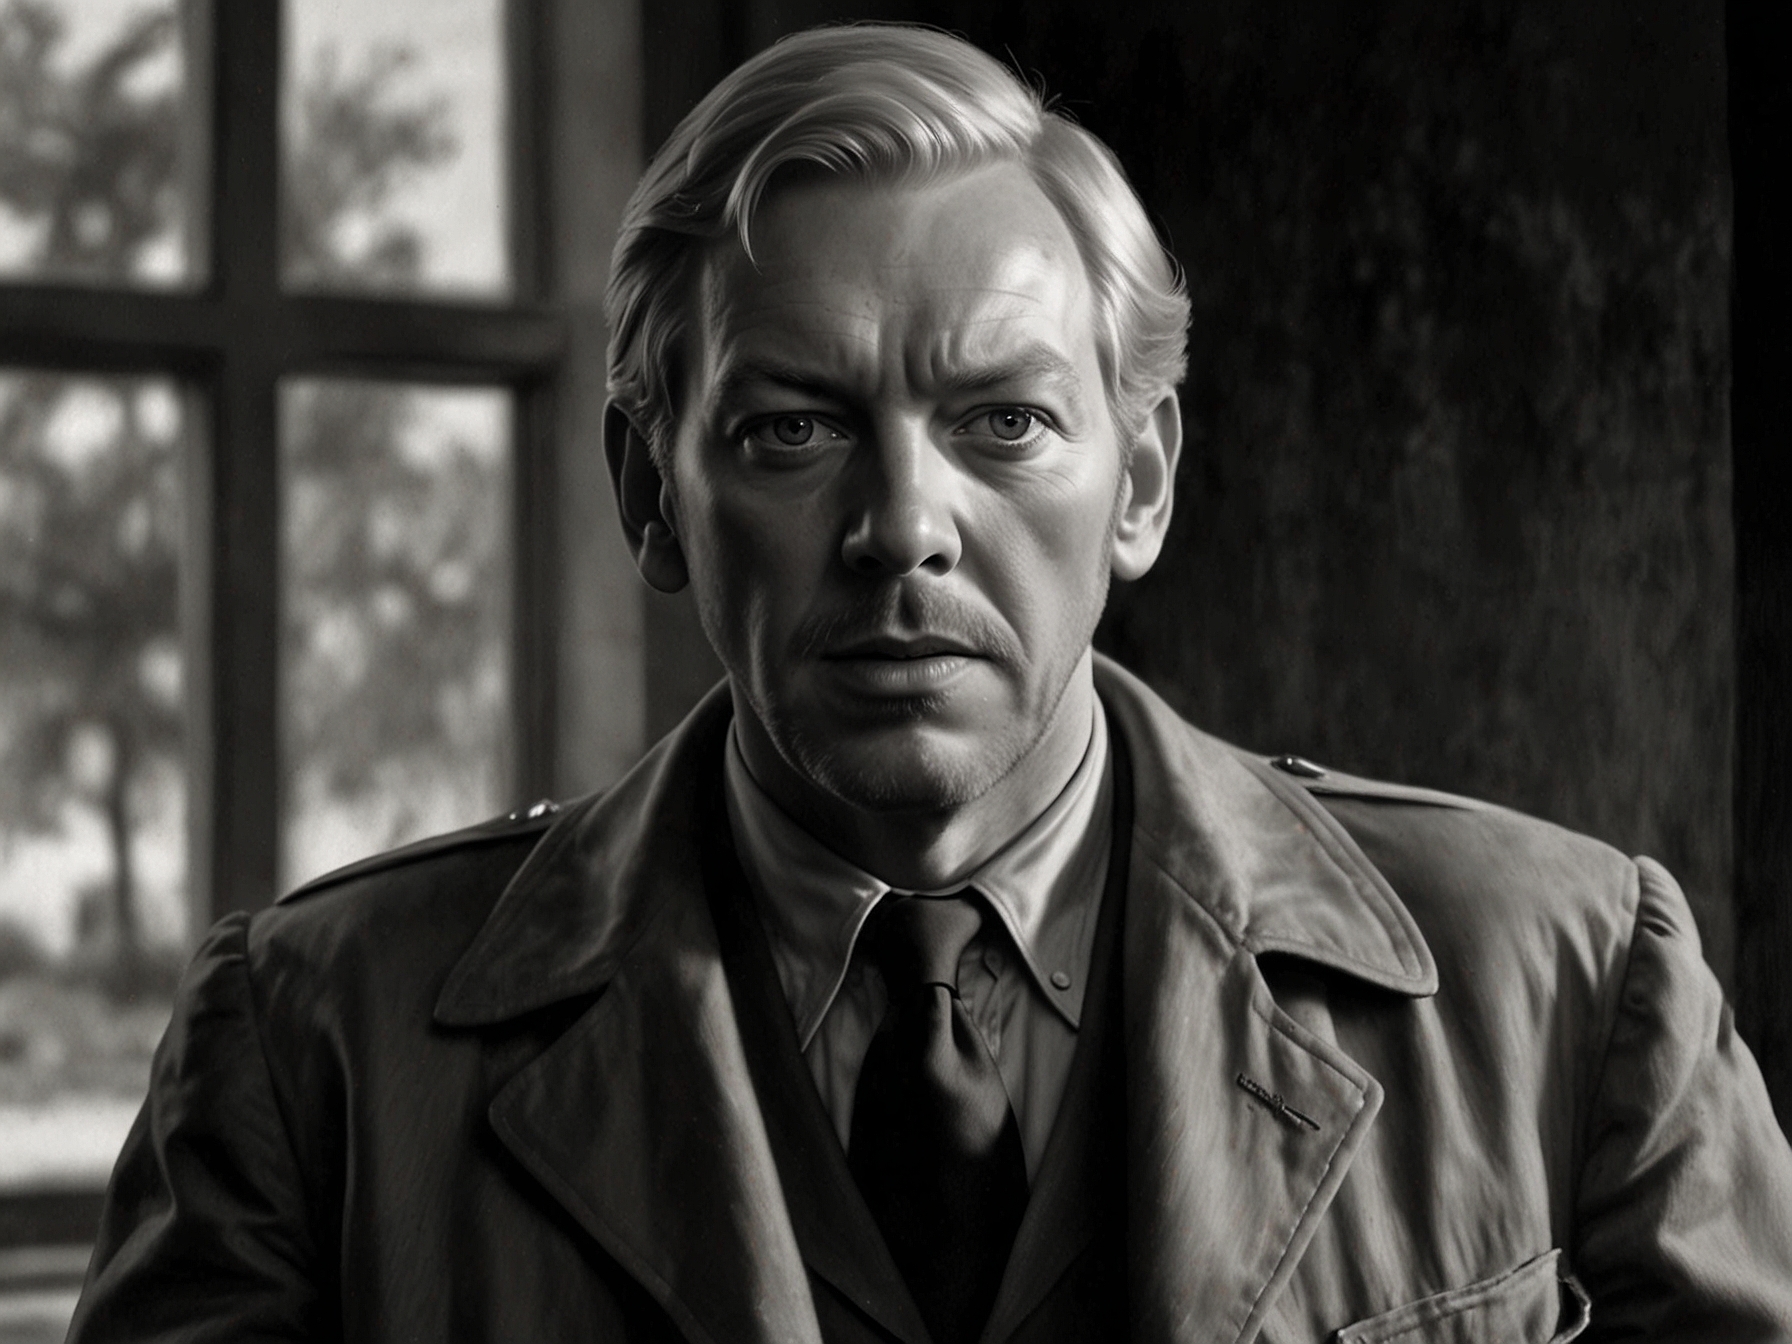 A black-and-white photo of a young Donald Sutherland, capturing his breakthrough role in The Dirty Dozen, which marked the beginning of his illustrious career in Hollywood.